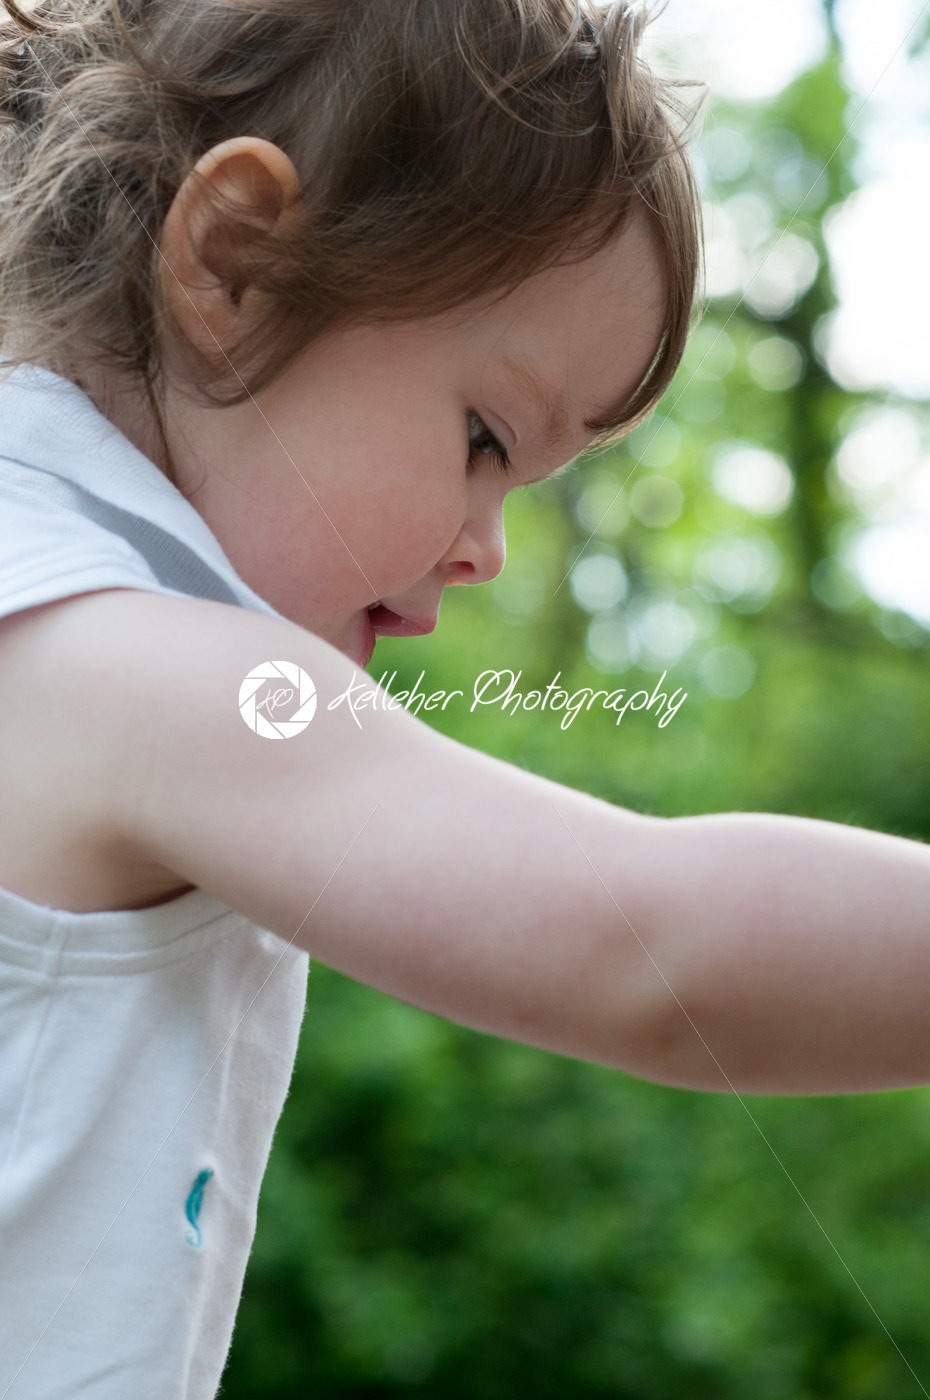 Young girl having fun outdoors in the back yard - Kelleher Photography Store